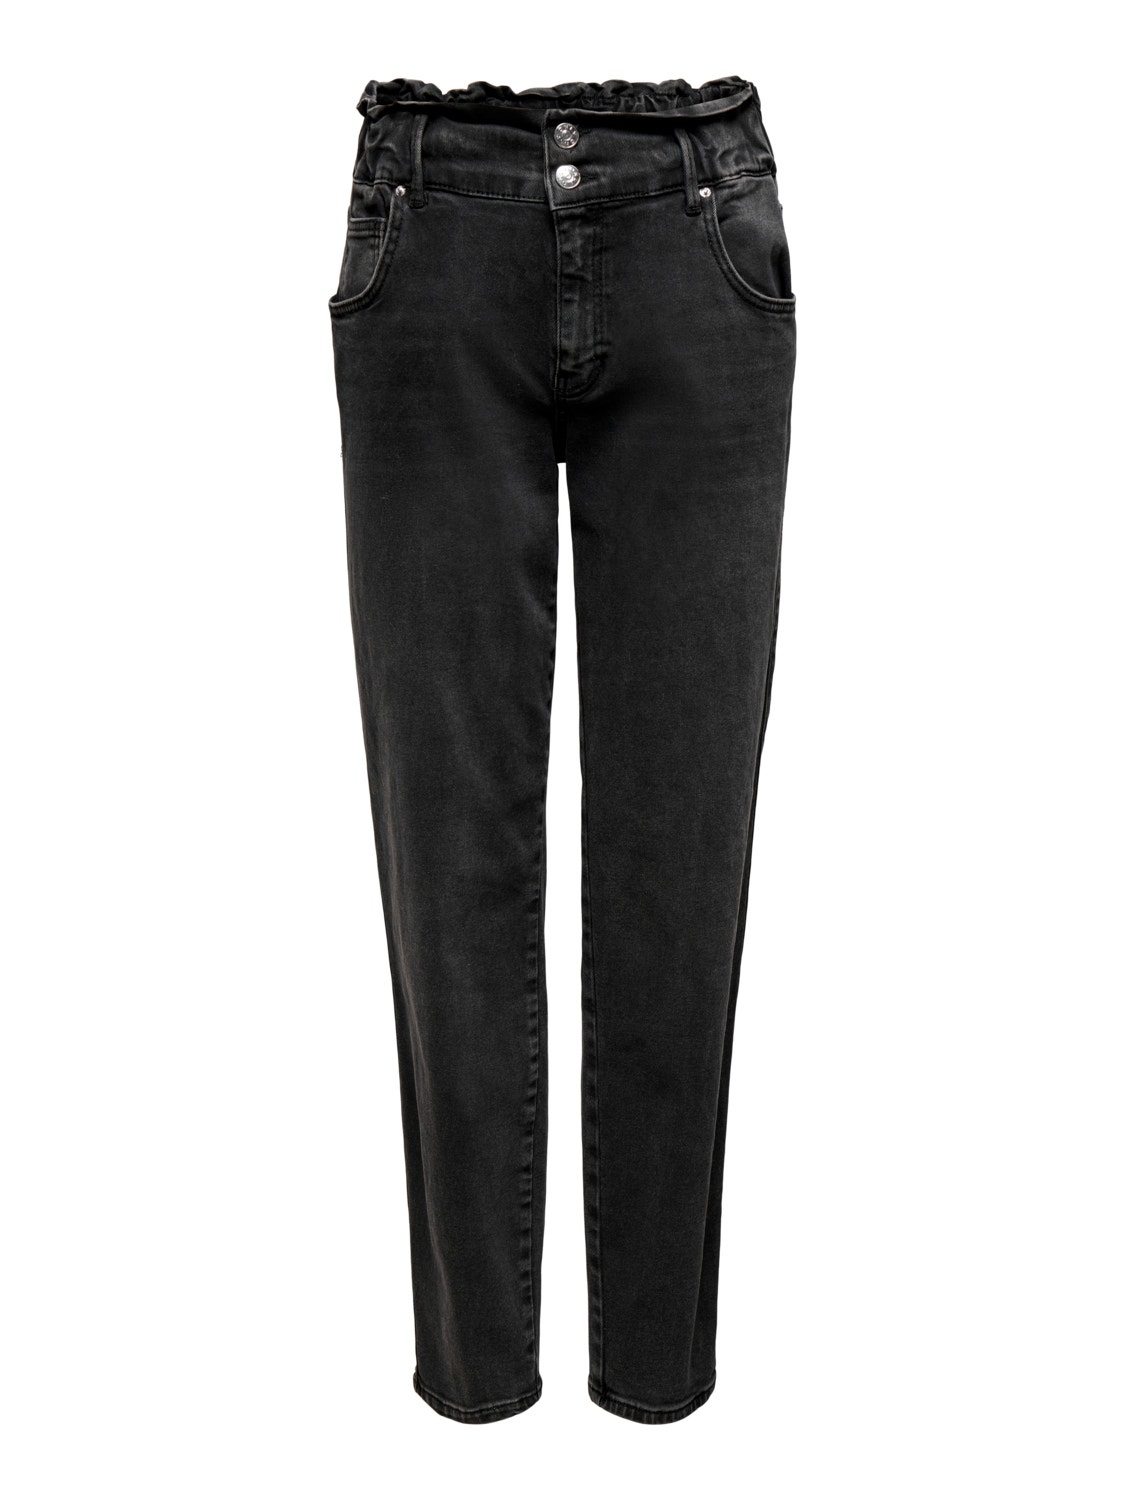 ONLY Skinny Fit Hohe Taille Jeans -Black Denim - 15254799